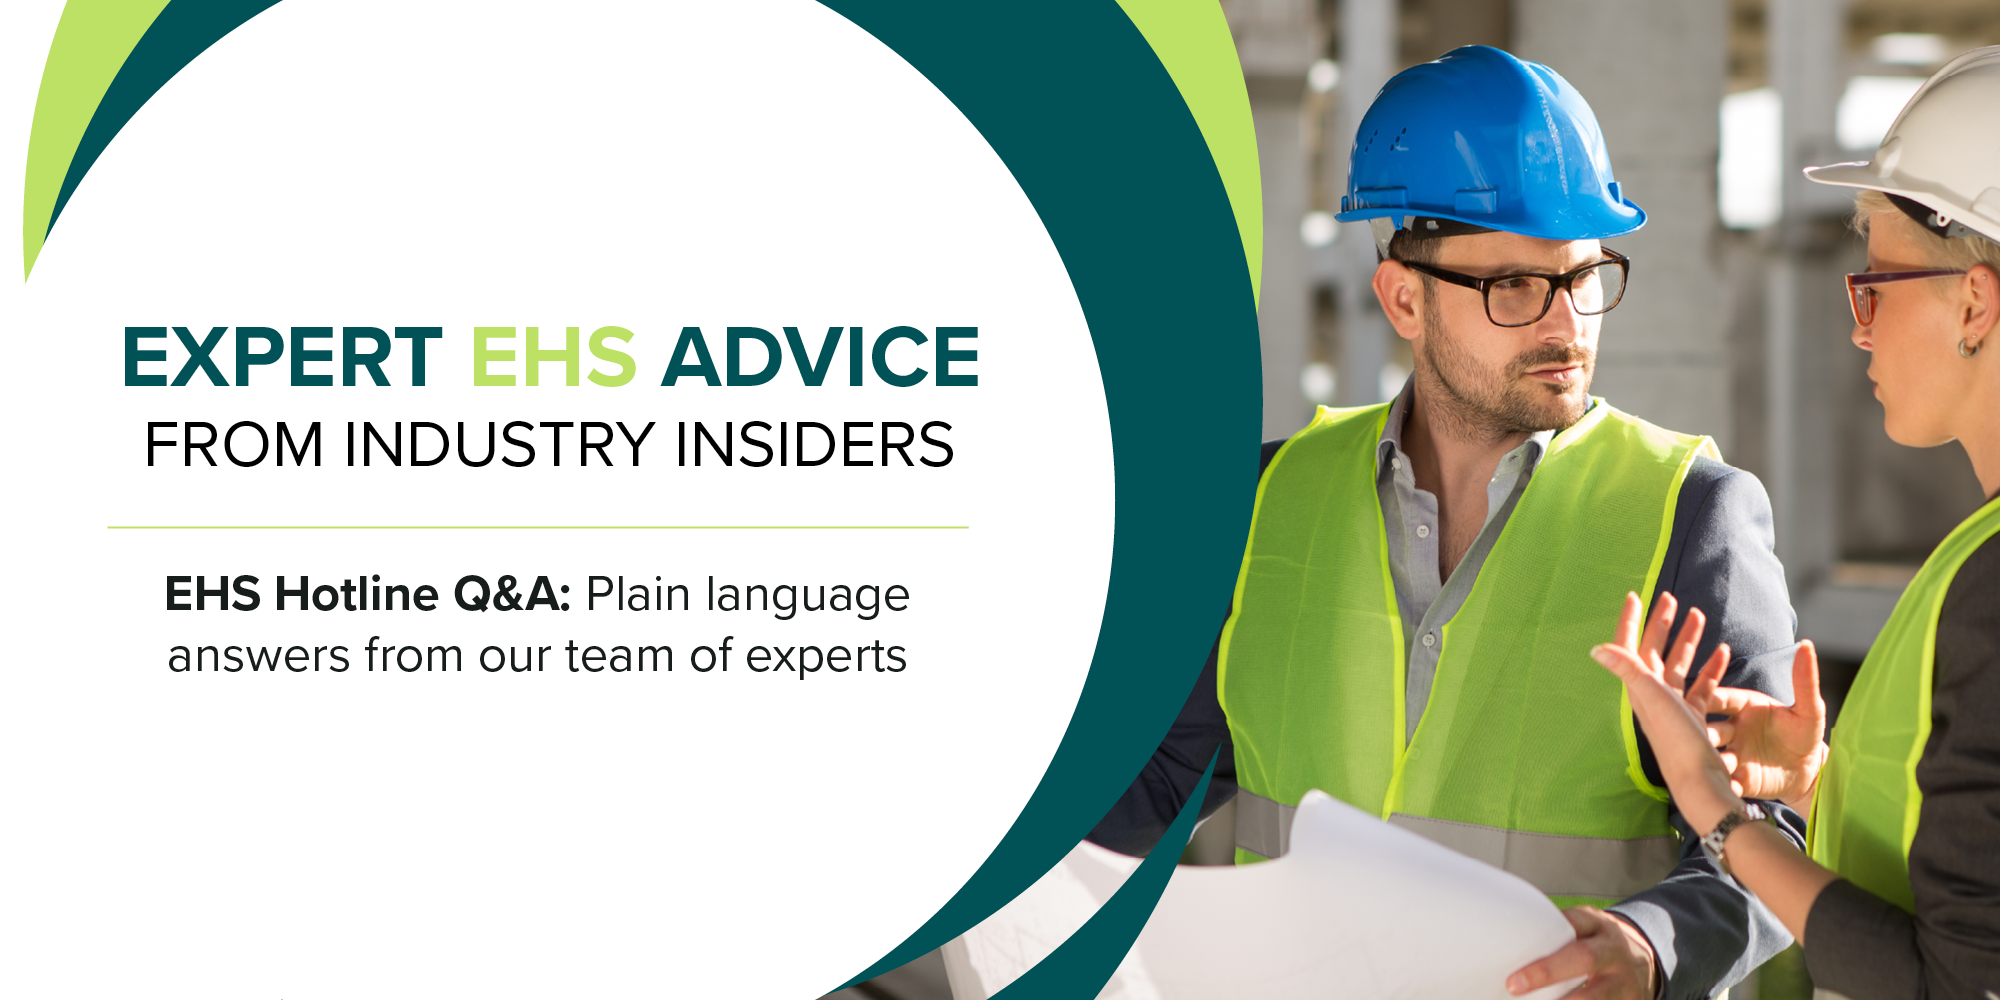 BLR's EHS Hotline provides plain language answers to your most pressing questions by our team of in-house subject matter experts